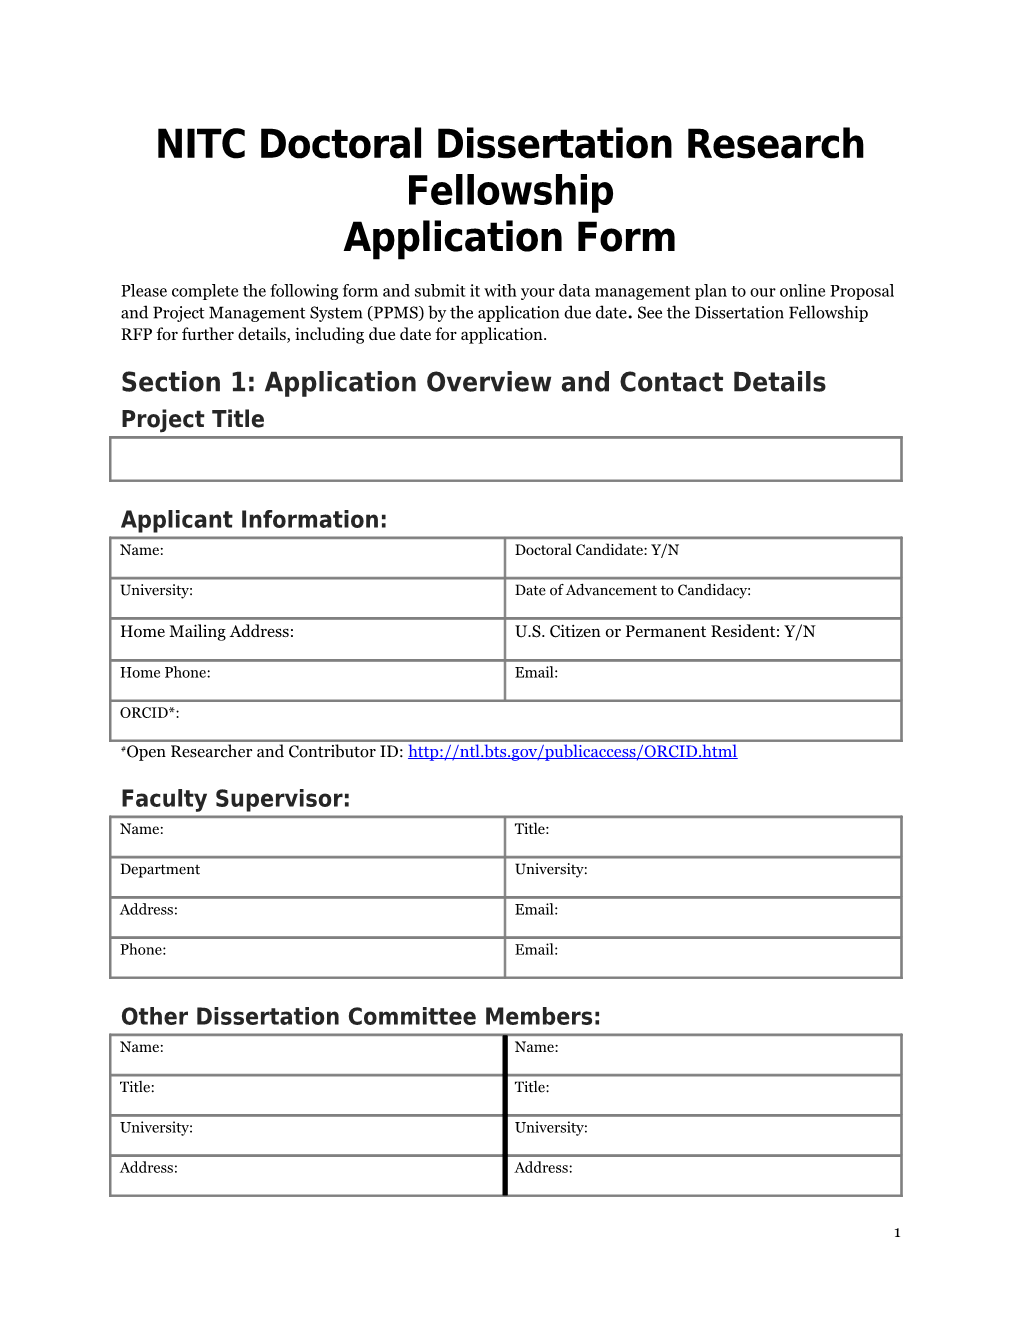 NITC Doctoral Dissertation Research Fellowship